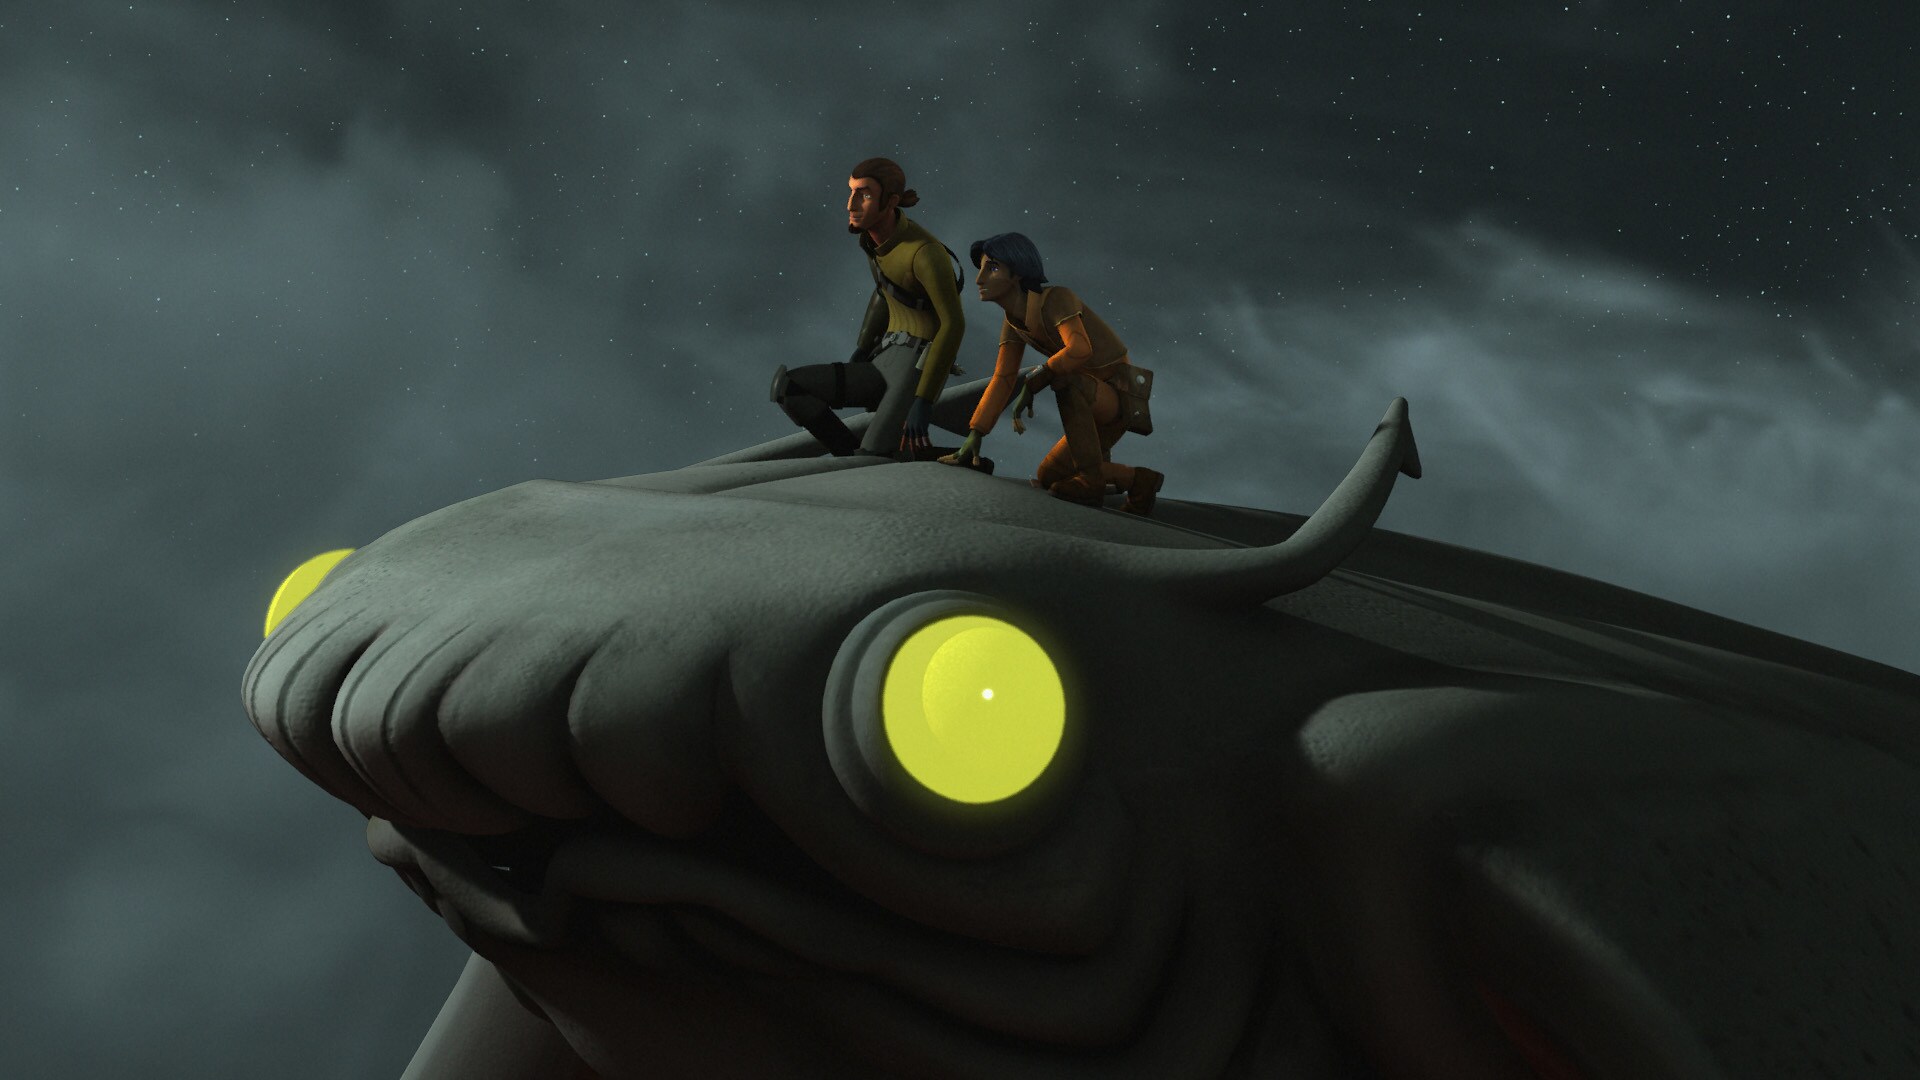 Thanks to his connection to animals, a tibidee rises to save them. "This was you?" Kanan asks, si...